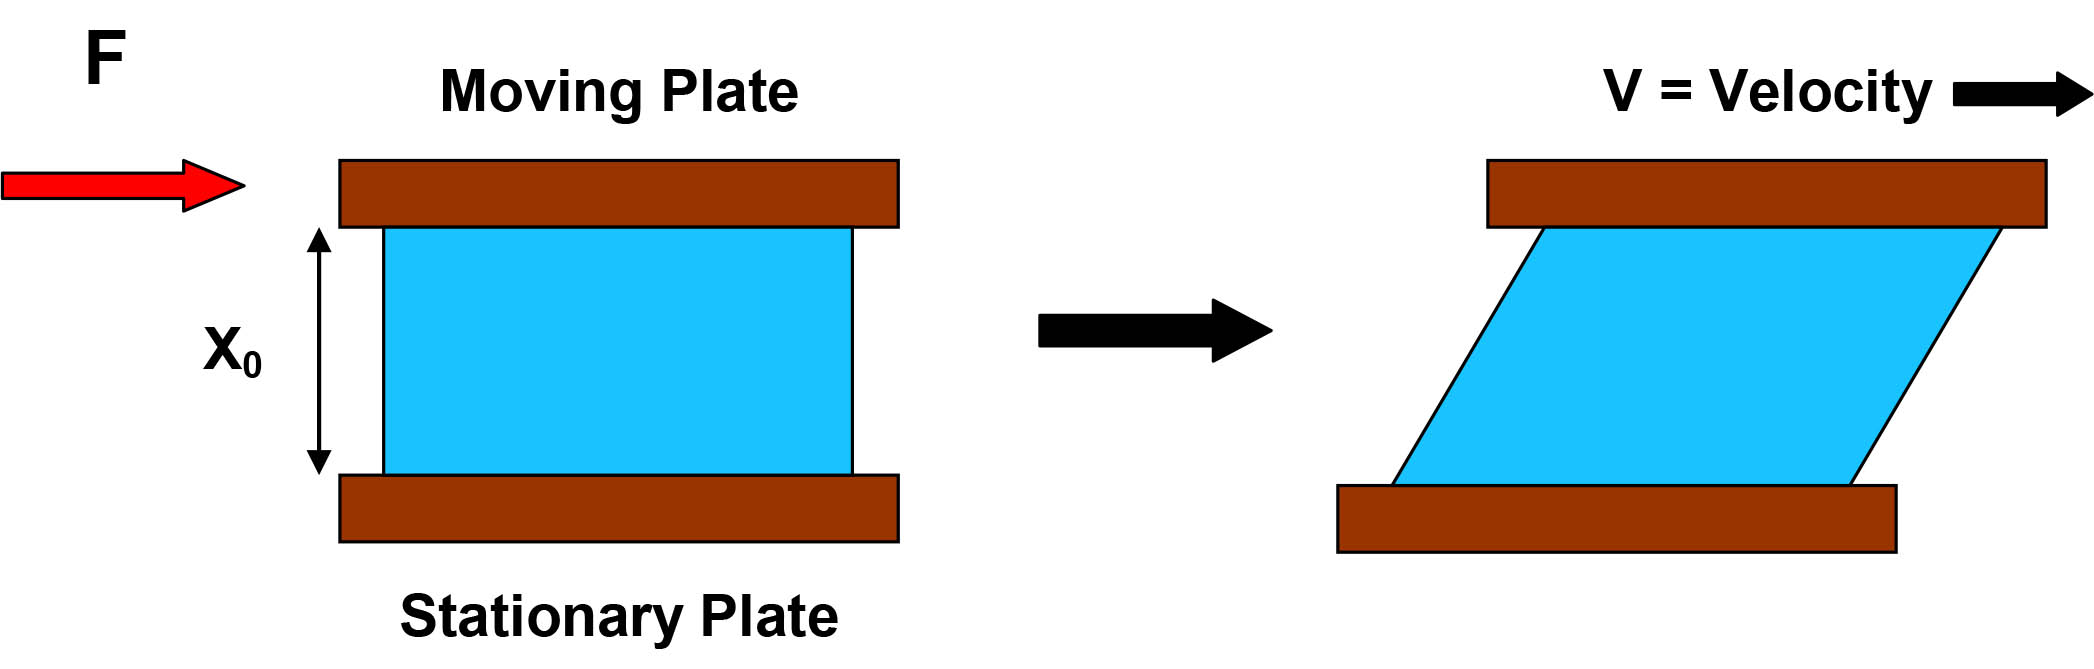 basic model of flow between two plates